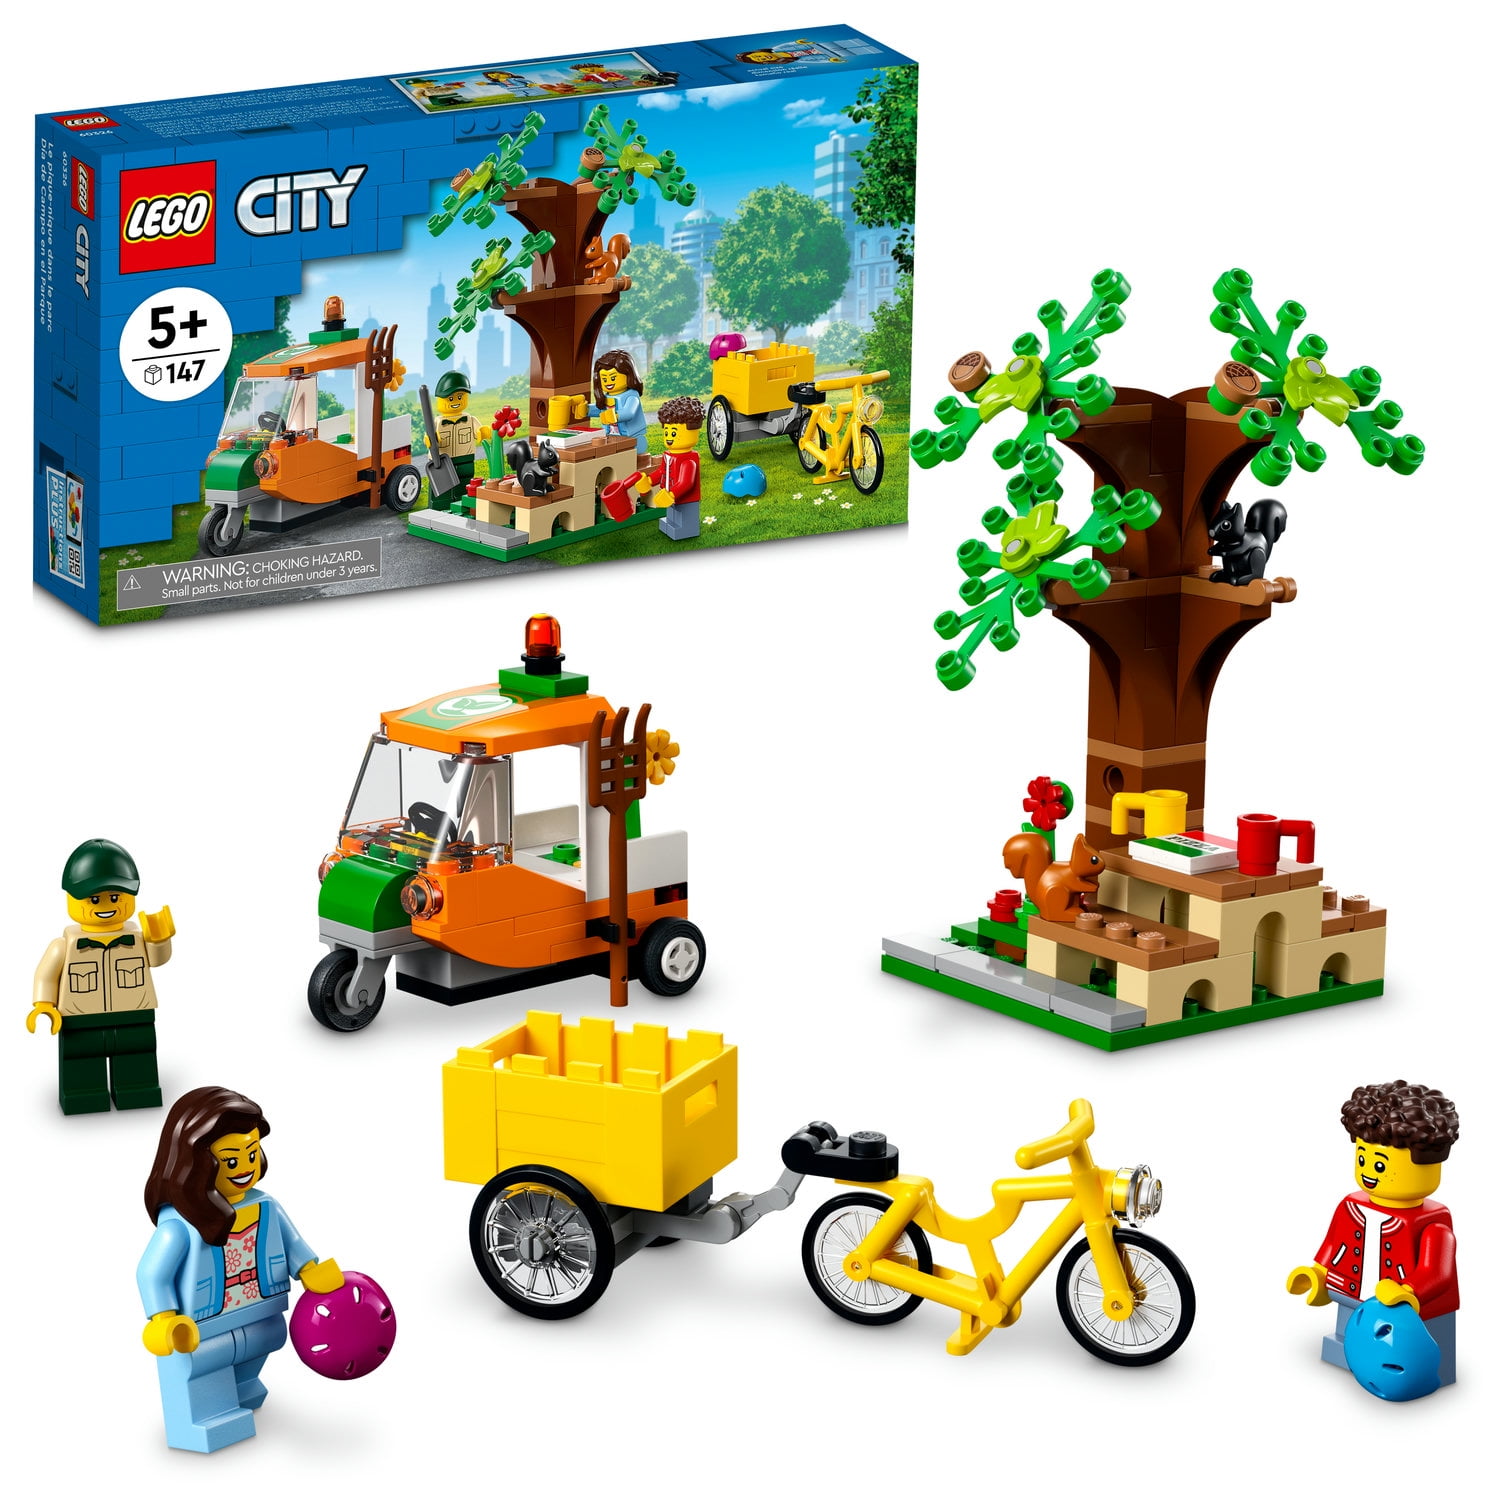 Lego City Town Red Bicycle For Minifigs to Ride Lot of 5 Great 4 Custom Builds 